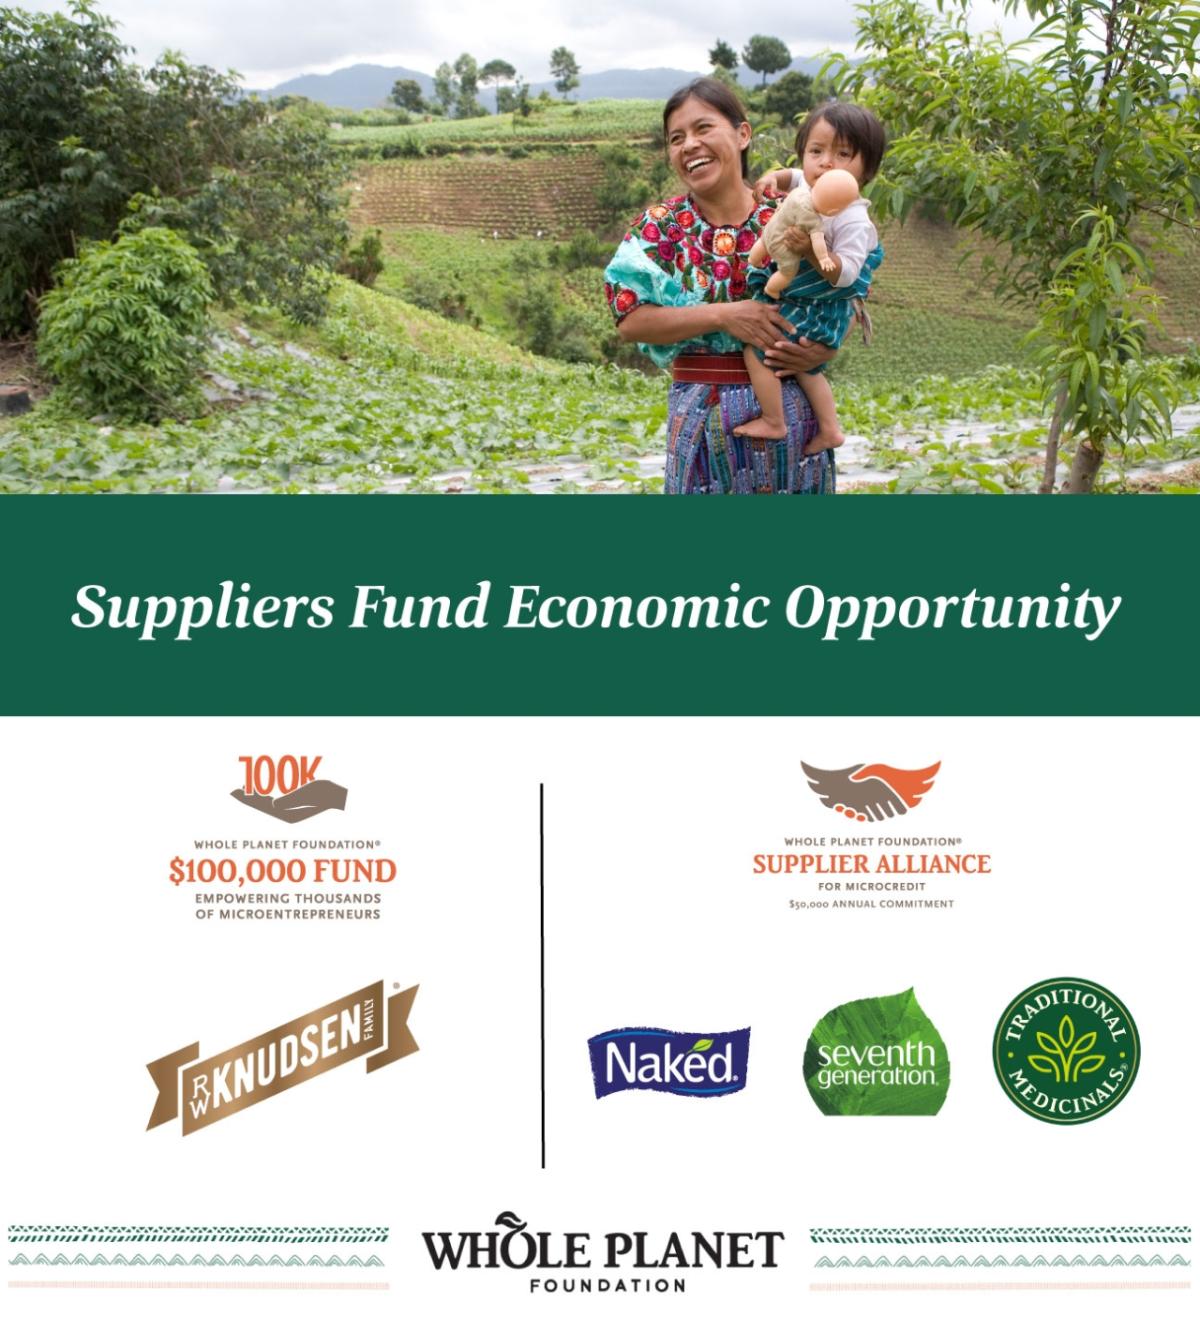 Suppliers Fund Economic Opportunity